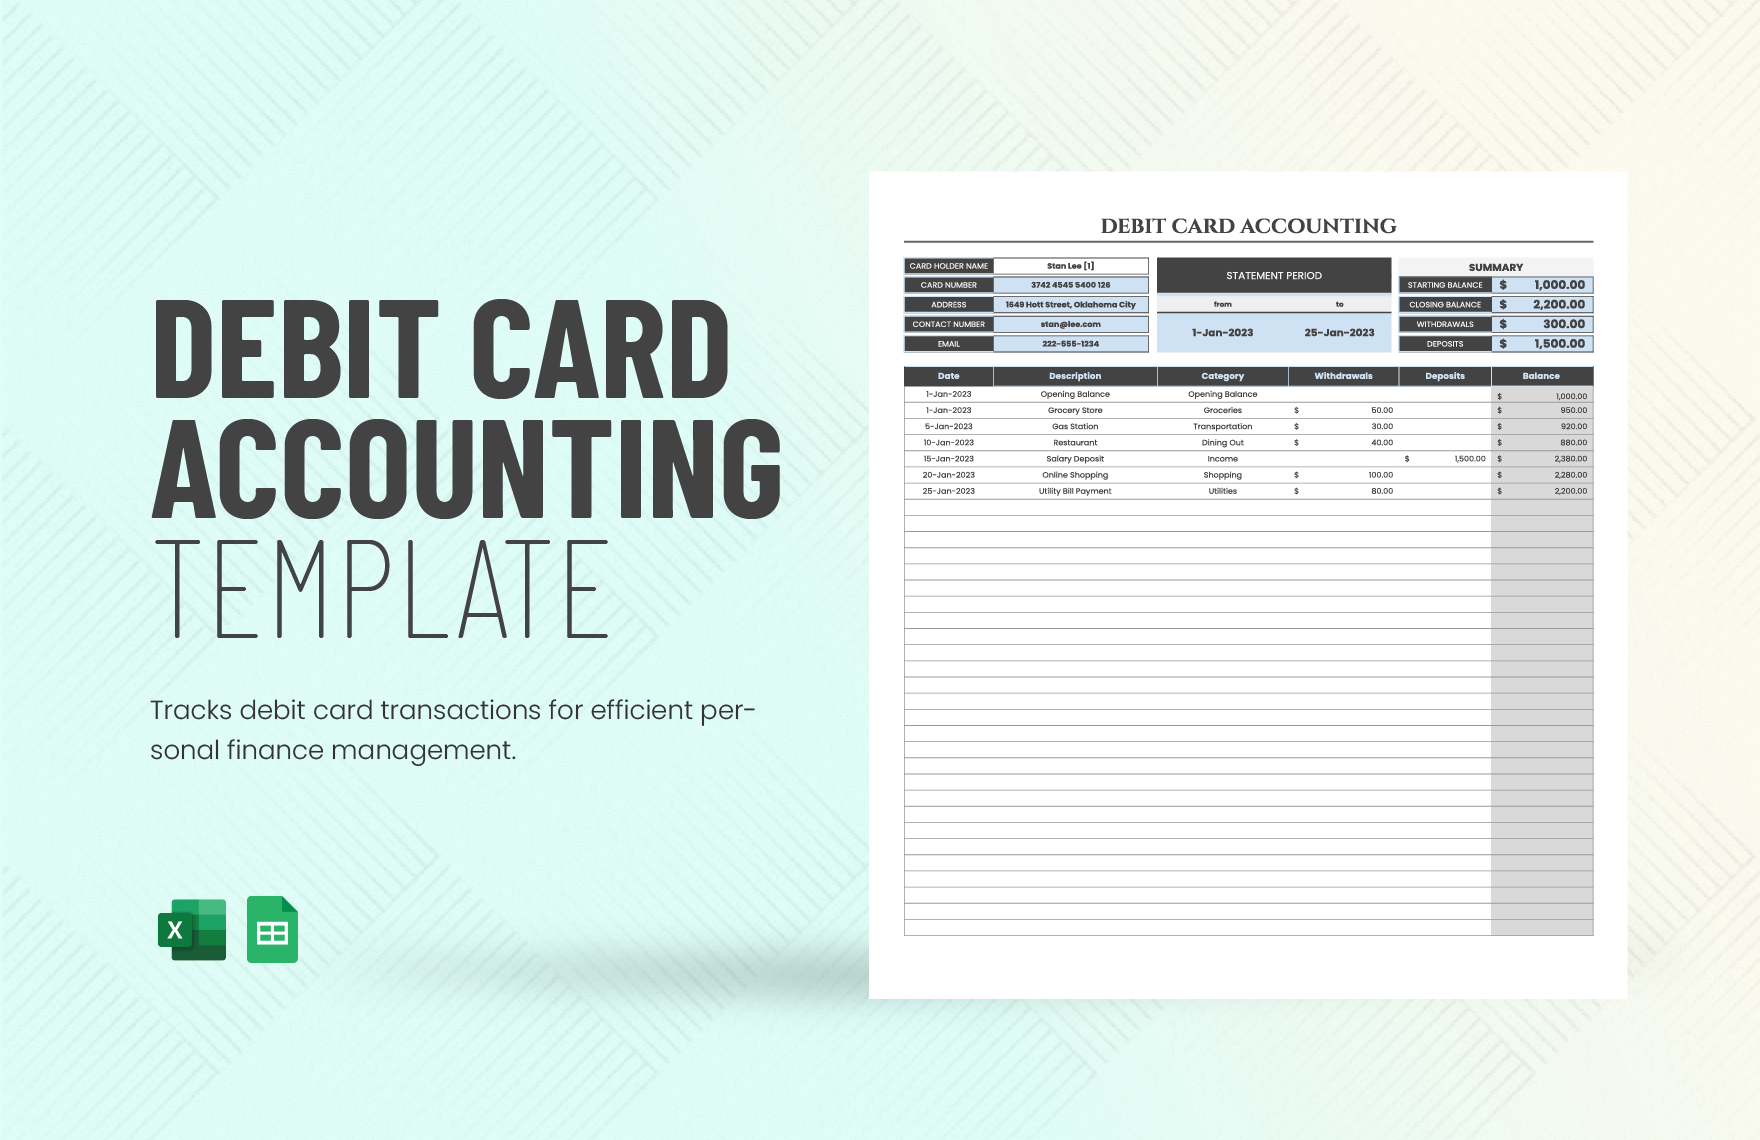 Debit Card Accounting Template